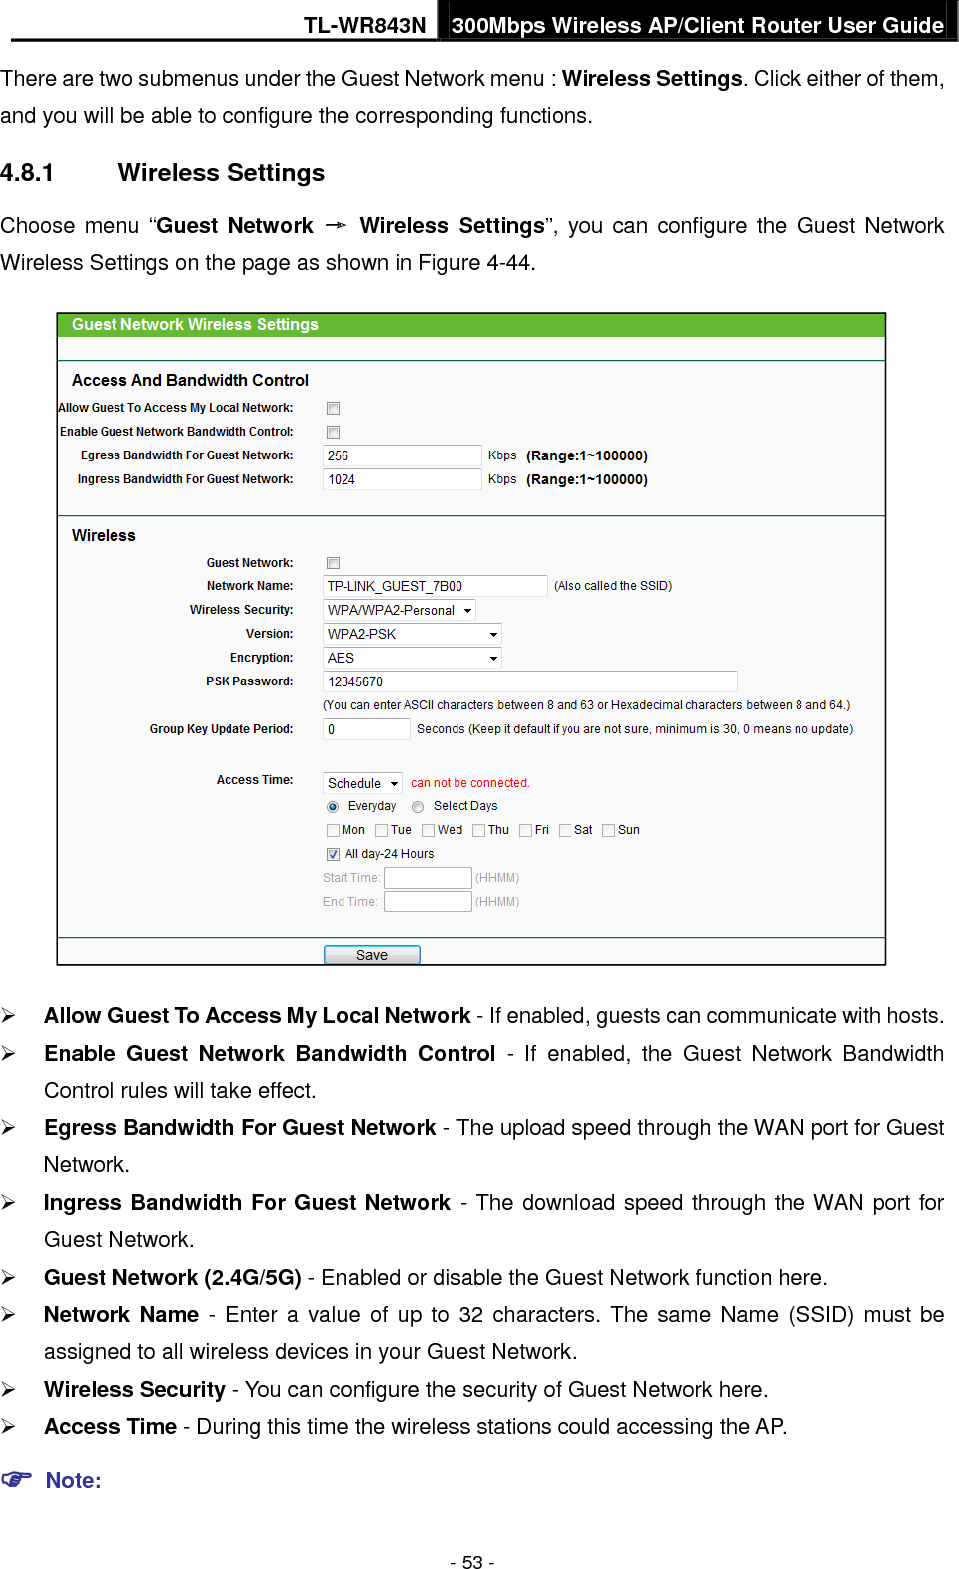 TL-WR843N 300Mbps Wireless AP/Client Router User Guide - 53 - There are two submenus under the Guest Network menu : Wireless Settings. Click either of them, and you will be able to configure the corresponding functions. 4.8.1 Wireless Settings Choose menu “Guest Network → Wireless Settings”, you can configure the Guest Network Wireless Settings on the page as shown in Figure 4-44. Allow Guest To Access My Local Network - If enabled, guests can communicate with hosts.Enable Guest Network Bandwidth Control - If enabled, the Guest Network BandwidthControl rules will take effect.Egress Bandwidth For Guest Network - The upload speed through the WAN port for GuestNetwork.Ingress Bandwidth For Guest Network - The download speed through the WAN port forGuest Network.Guest Network (2.4G/5G) - Enabled or disable the Guest Network function here.Network Name -  Enter a value of up to 32 characters. The same Name (SSID) must beassigned to all wireless devices in your Guest Network.Wireless Security - You can configure the security of Guest Network here.Access Time - During this time the wireless stations could accessing the AP. Note: